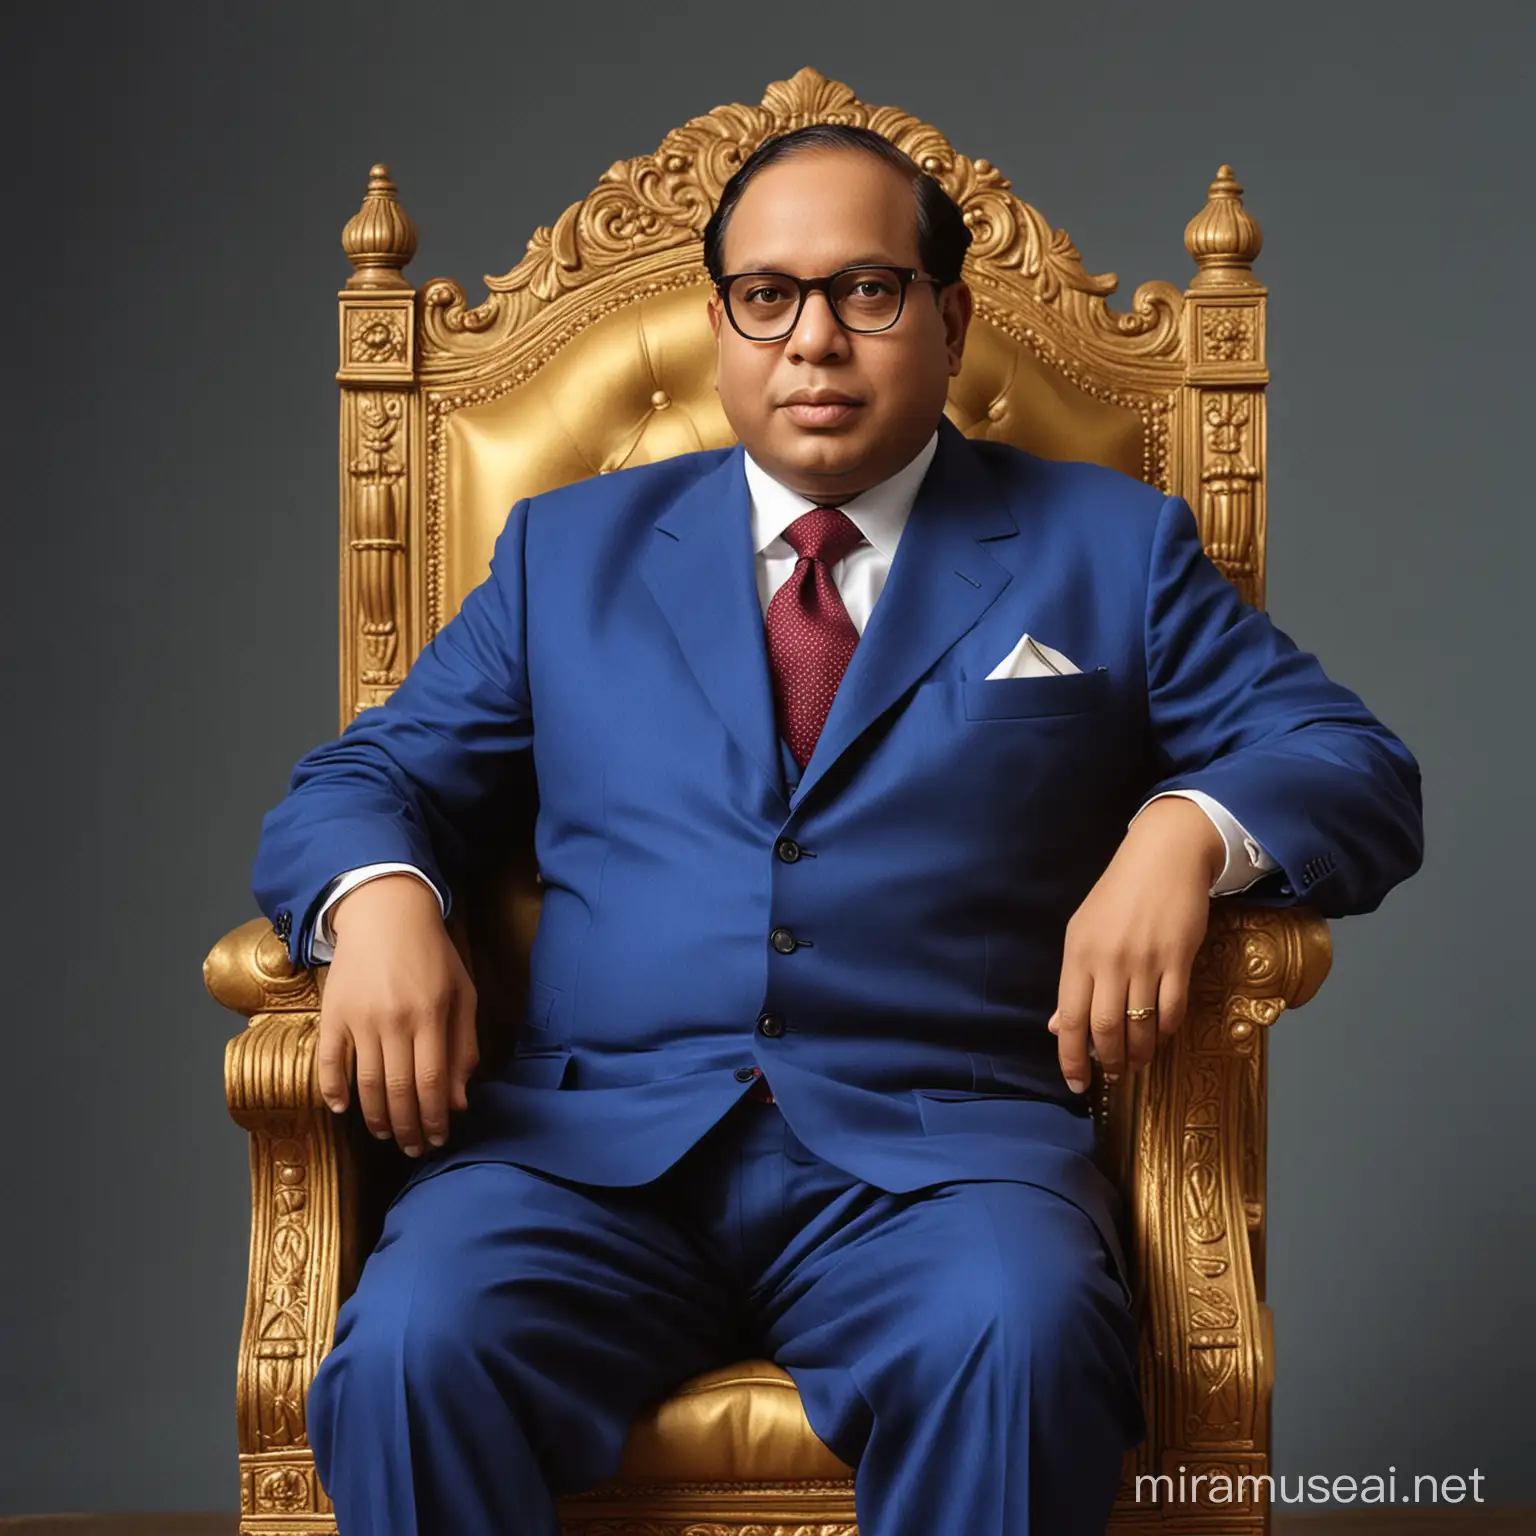 Babasaheb Ambedkar Sitting on Golden Chair Iconic Portrait in Blue Suit